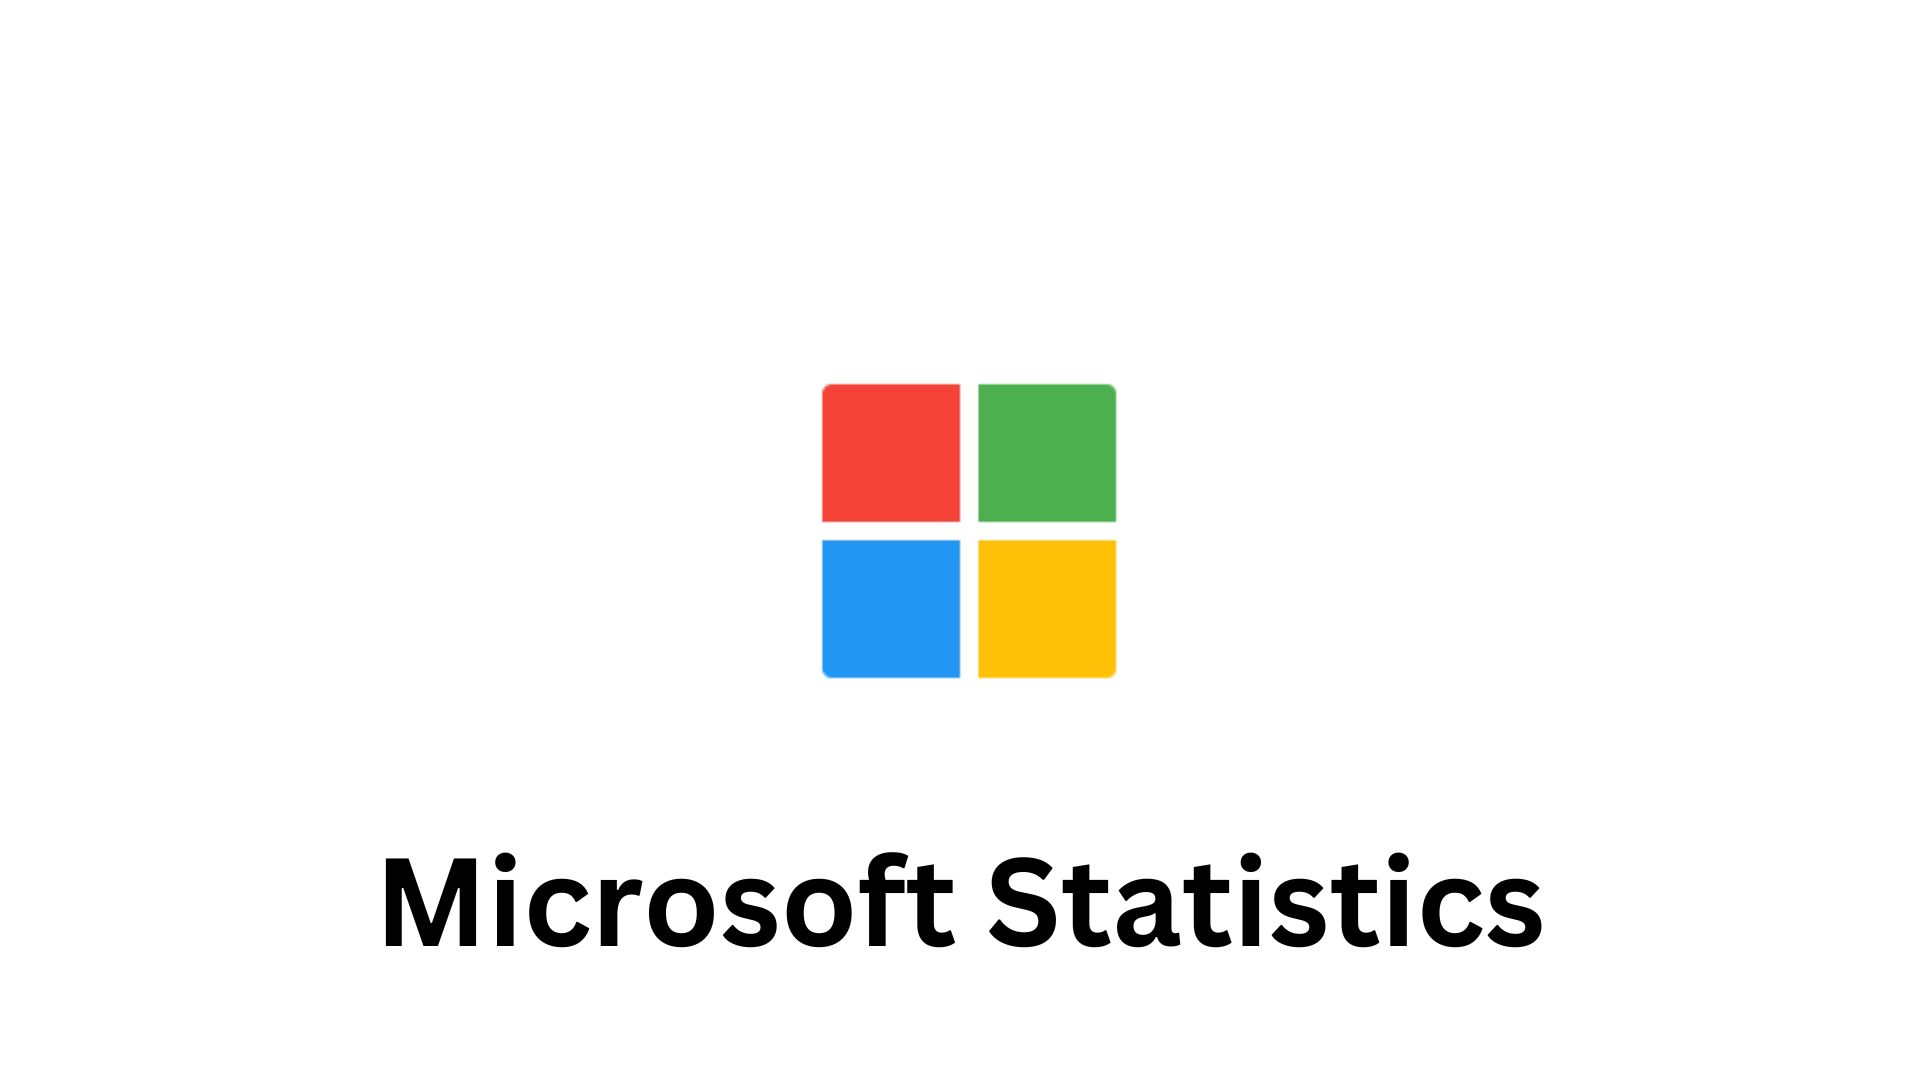 Microsoft Statistics By Revenue, OS Popularity and Users